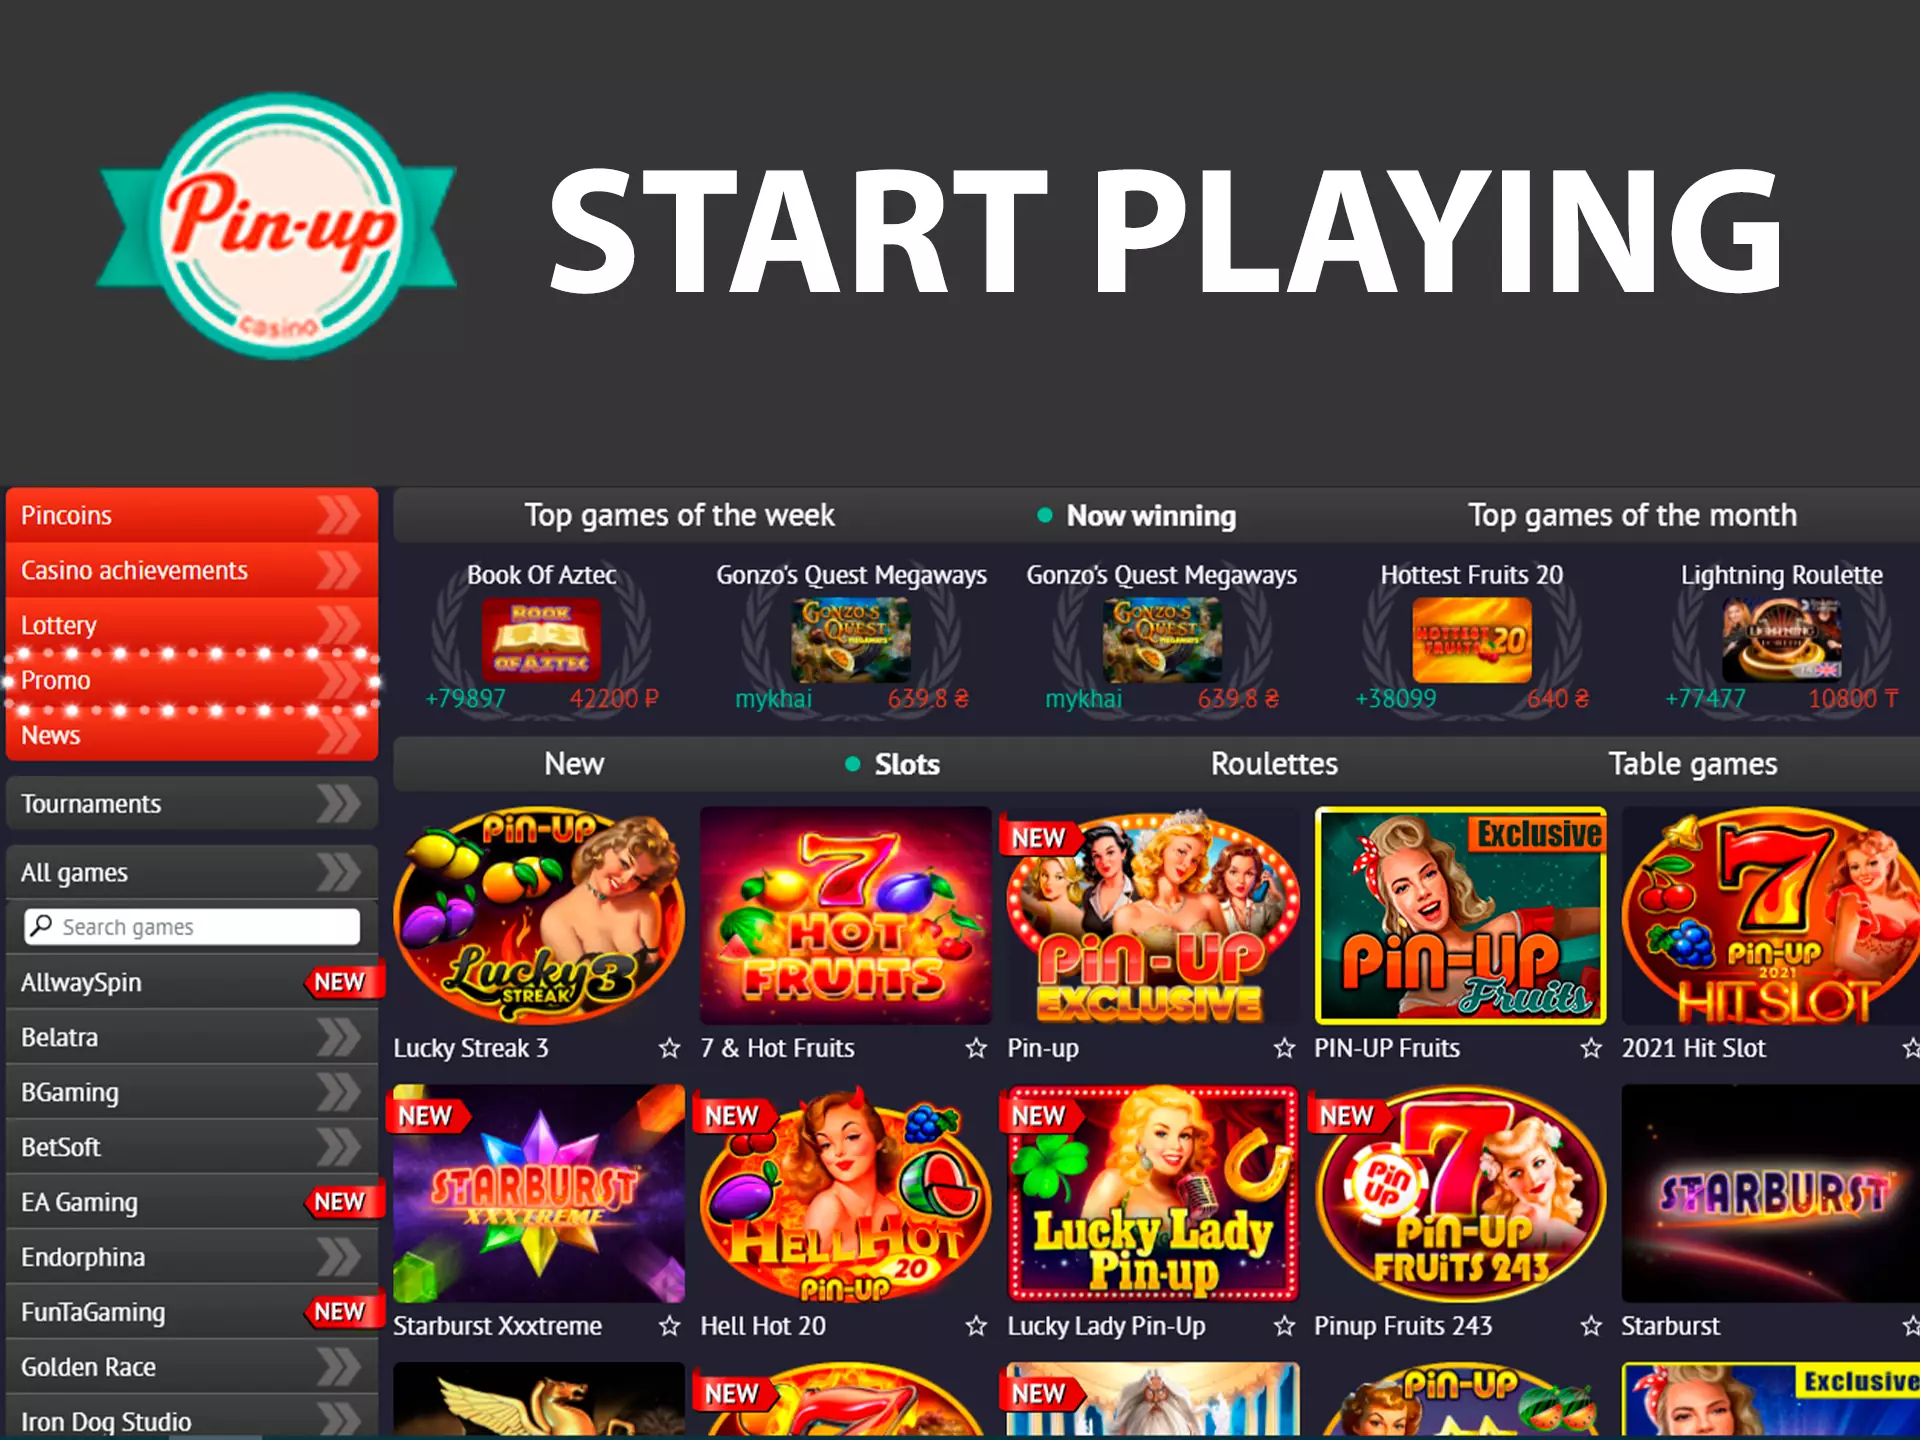 Sign up for Pin-Up to start playing on money.